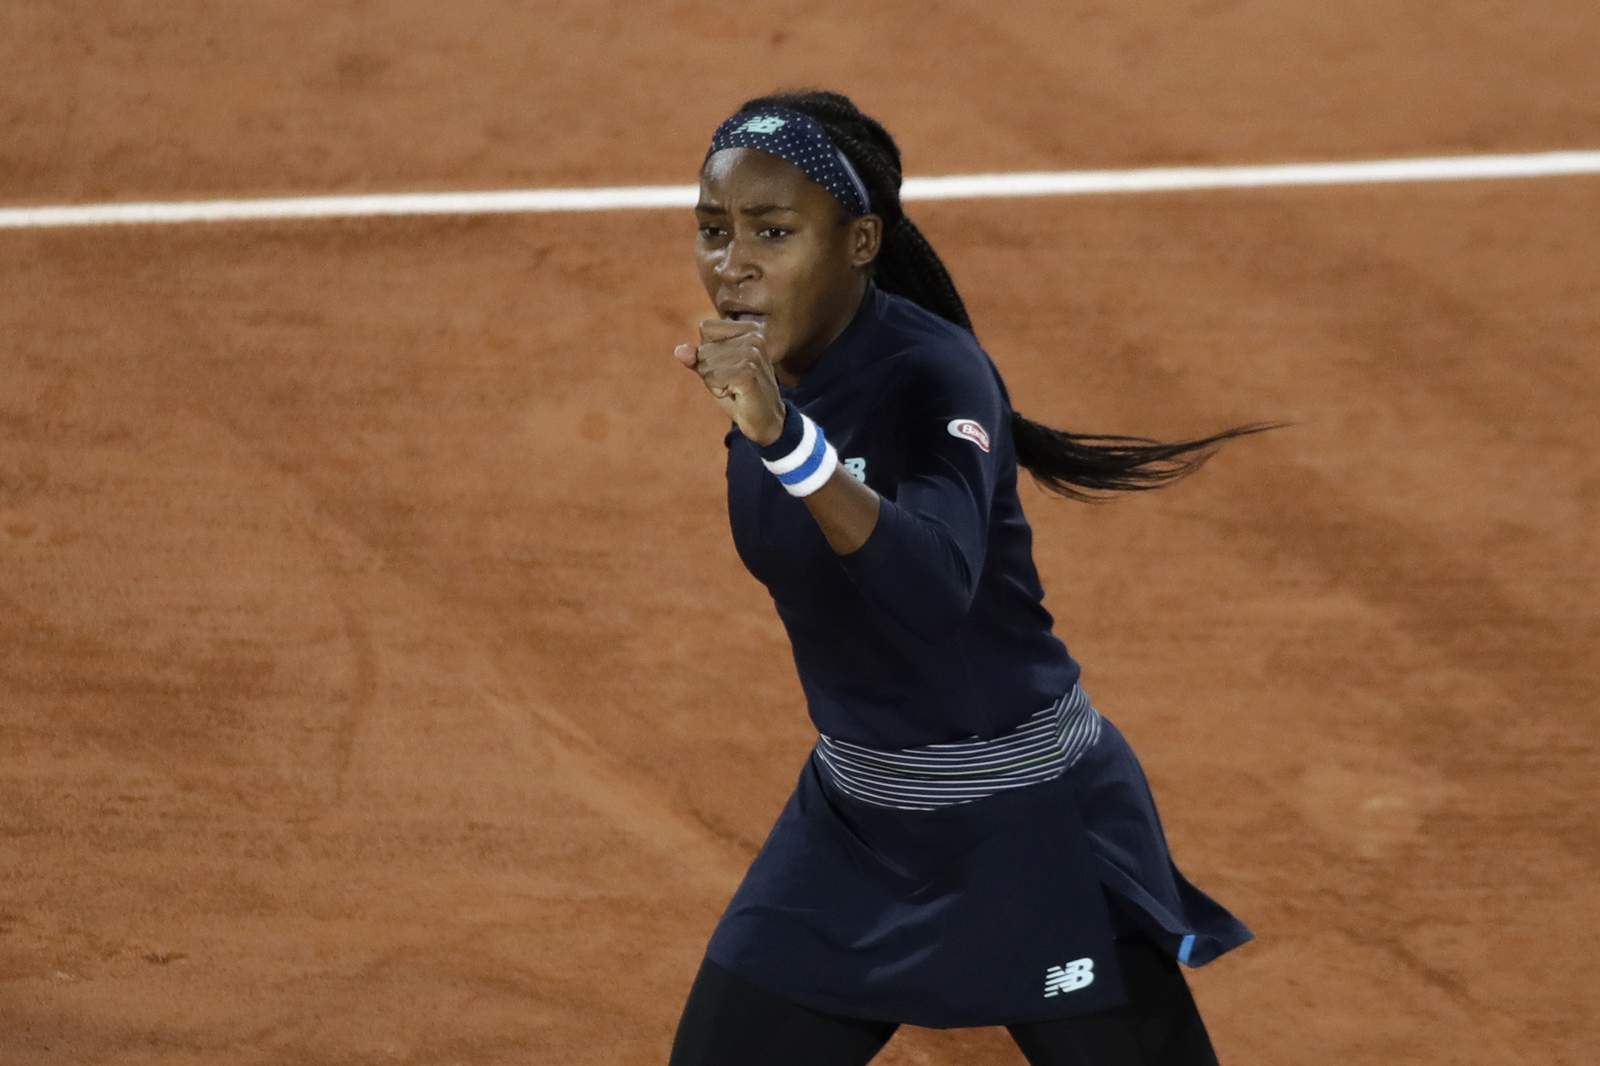 No chill for Coco: Gauff ousts 9th seed in French Open debut